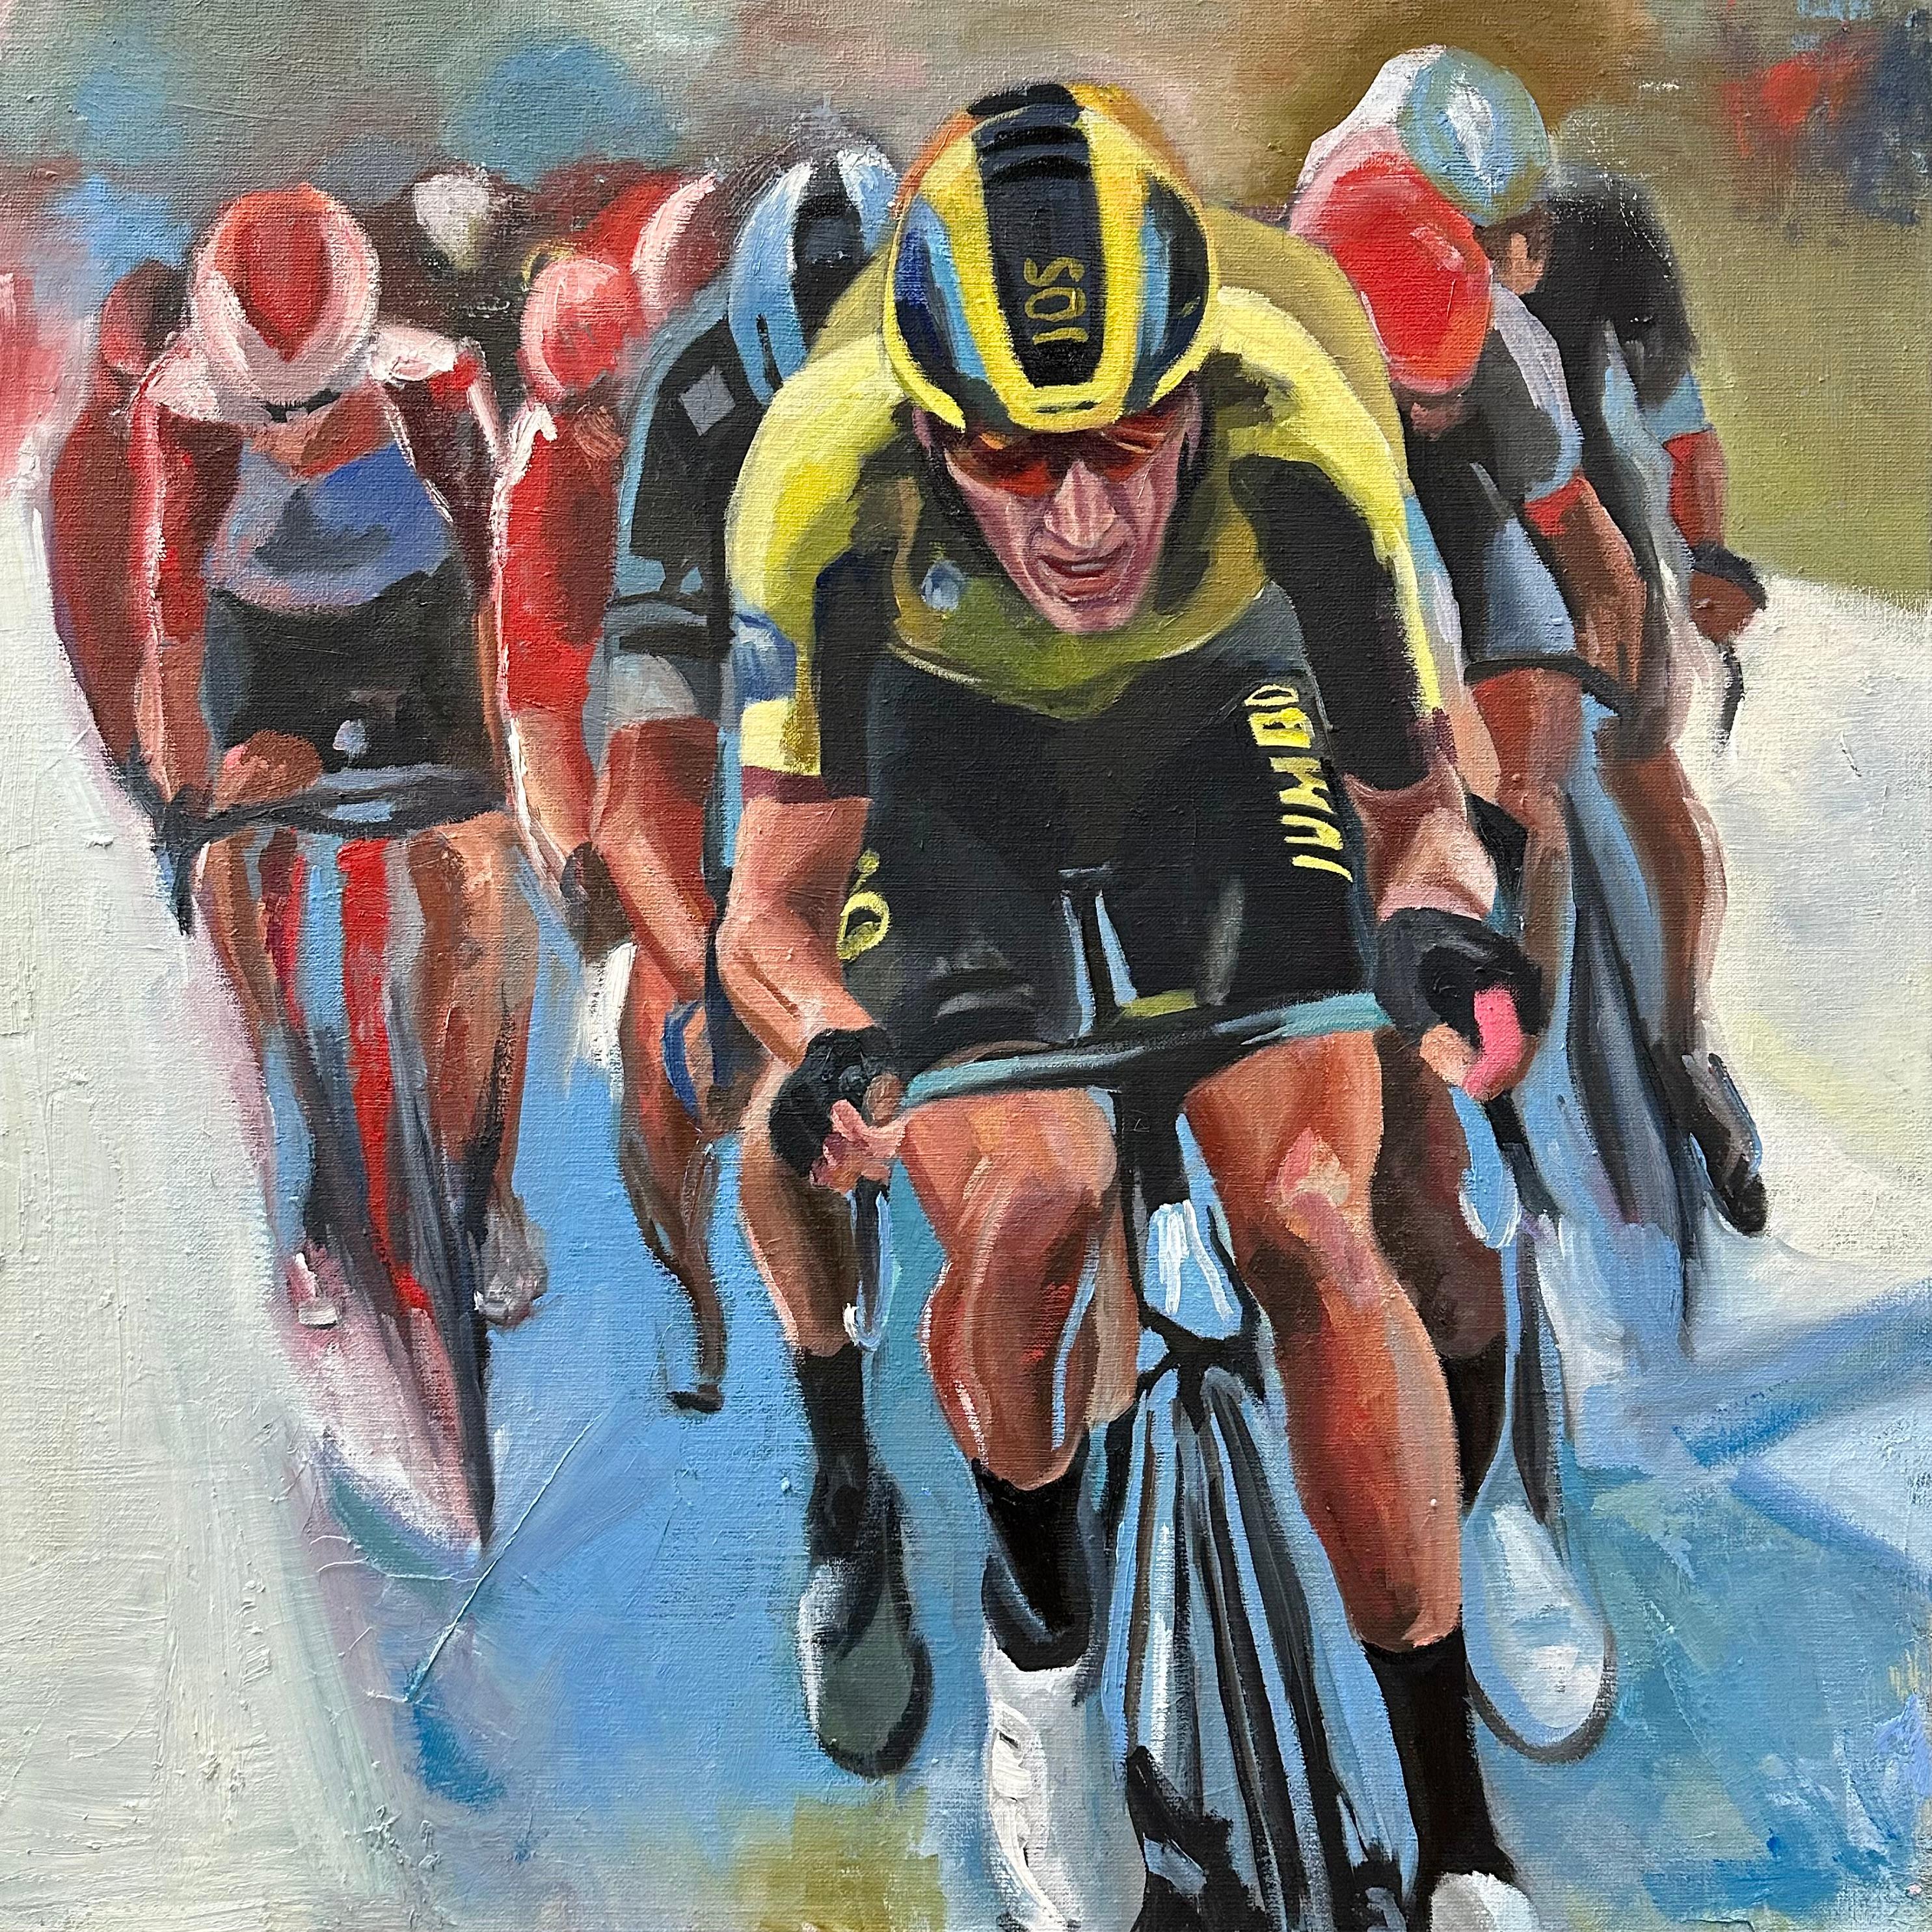 David van der Linden Portrait Painting - In the Lead- 21st Century contemporary painting of a cycling peloton